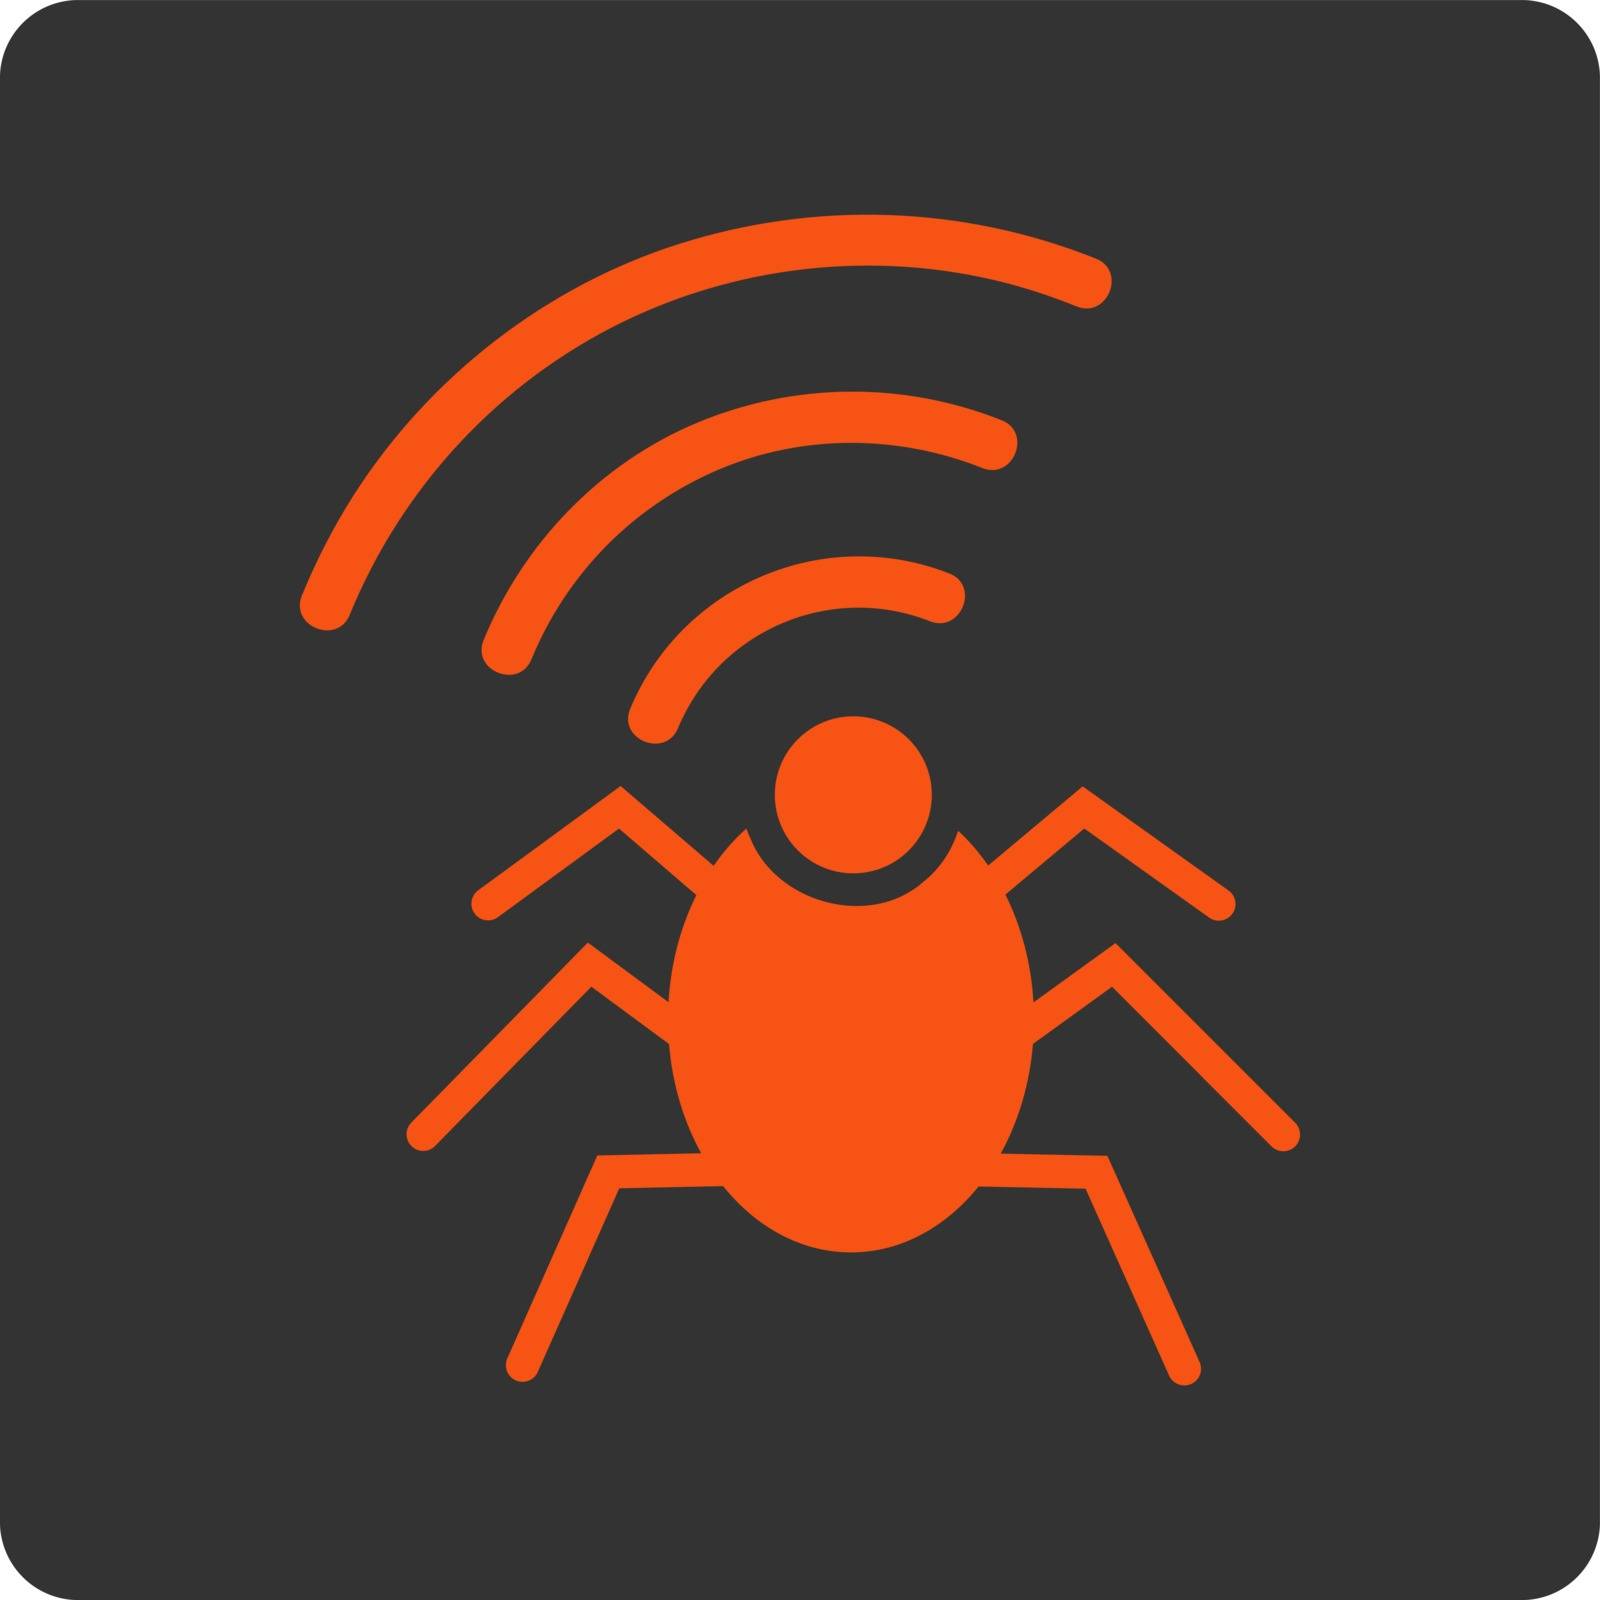 Radio spy bug icon. Vector style is orange and gray colors, flat rounded square button on a white background.